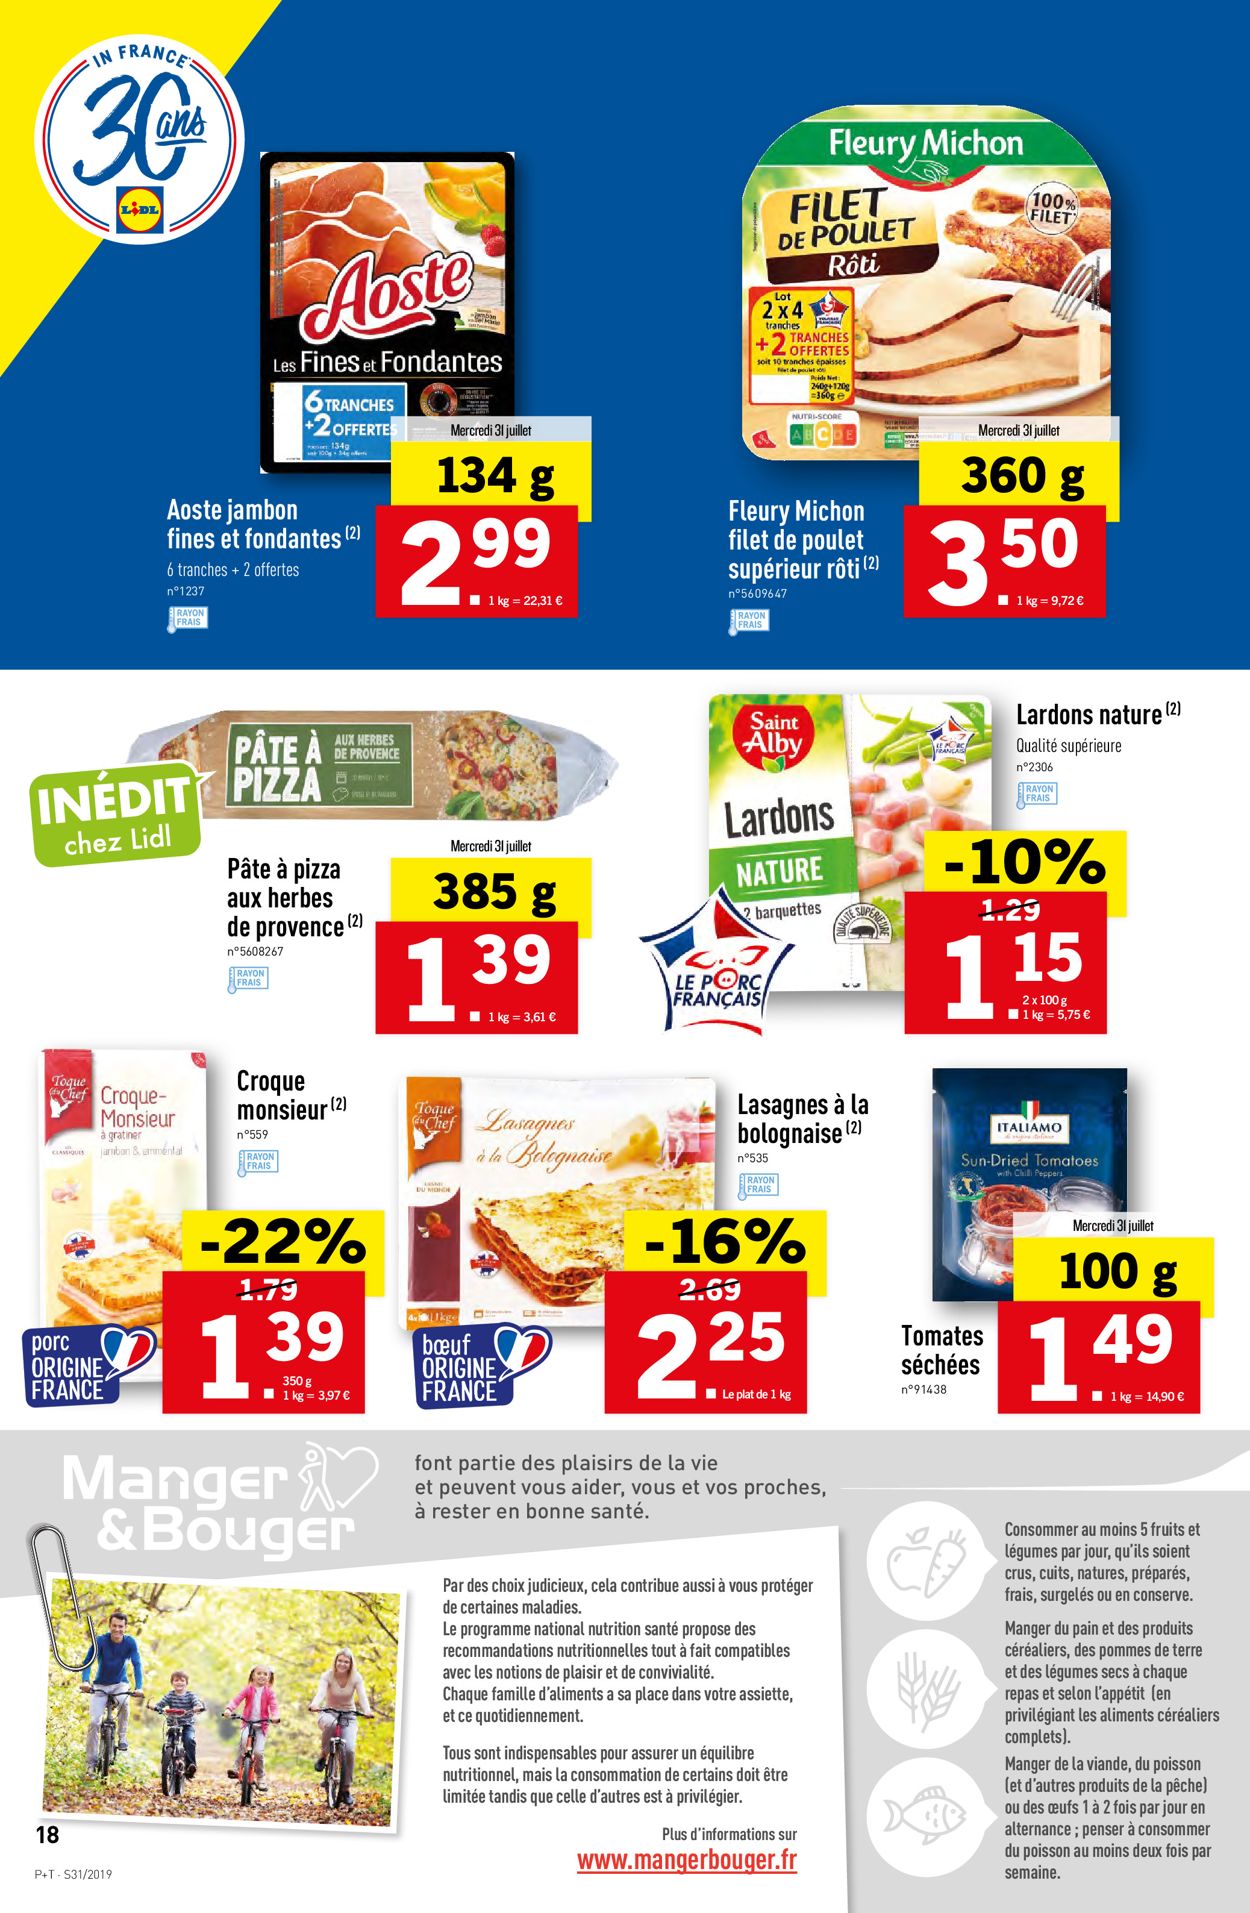 Lidl Catalogue - 31.07-06.08.2019 (Page 18)